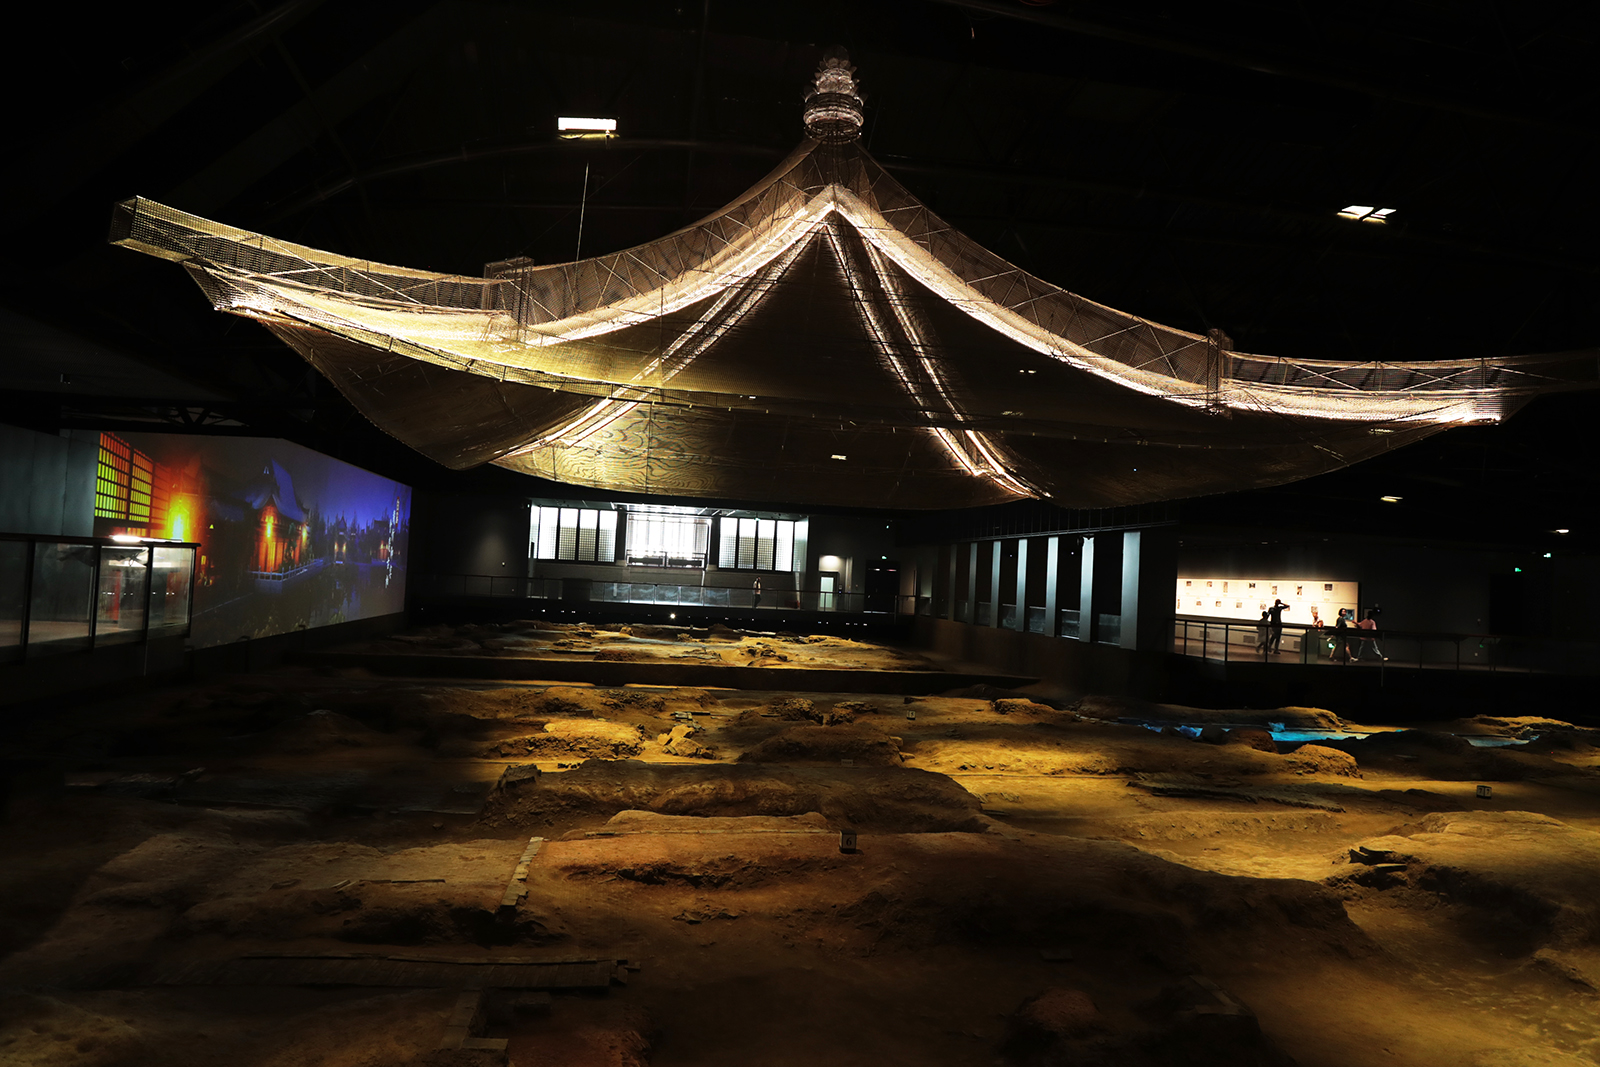 The replica of the roof of a pavilion is seen at the Deshou Palace Ruins Museum in Hangzhou, Zhejiang Province. /CGTN